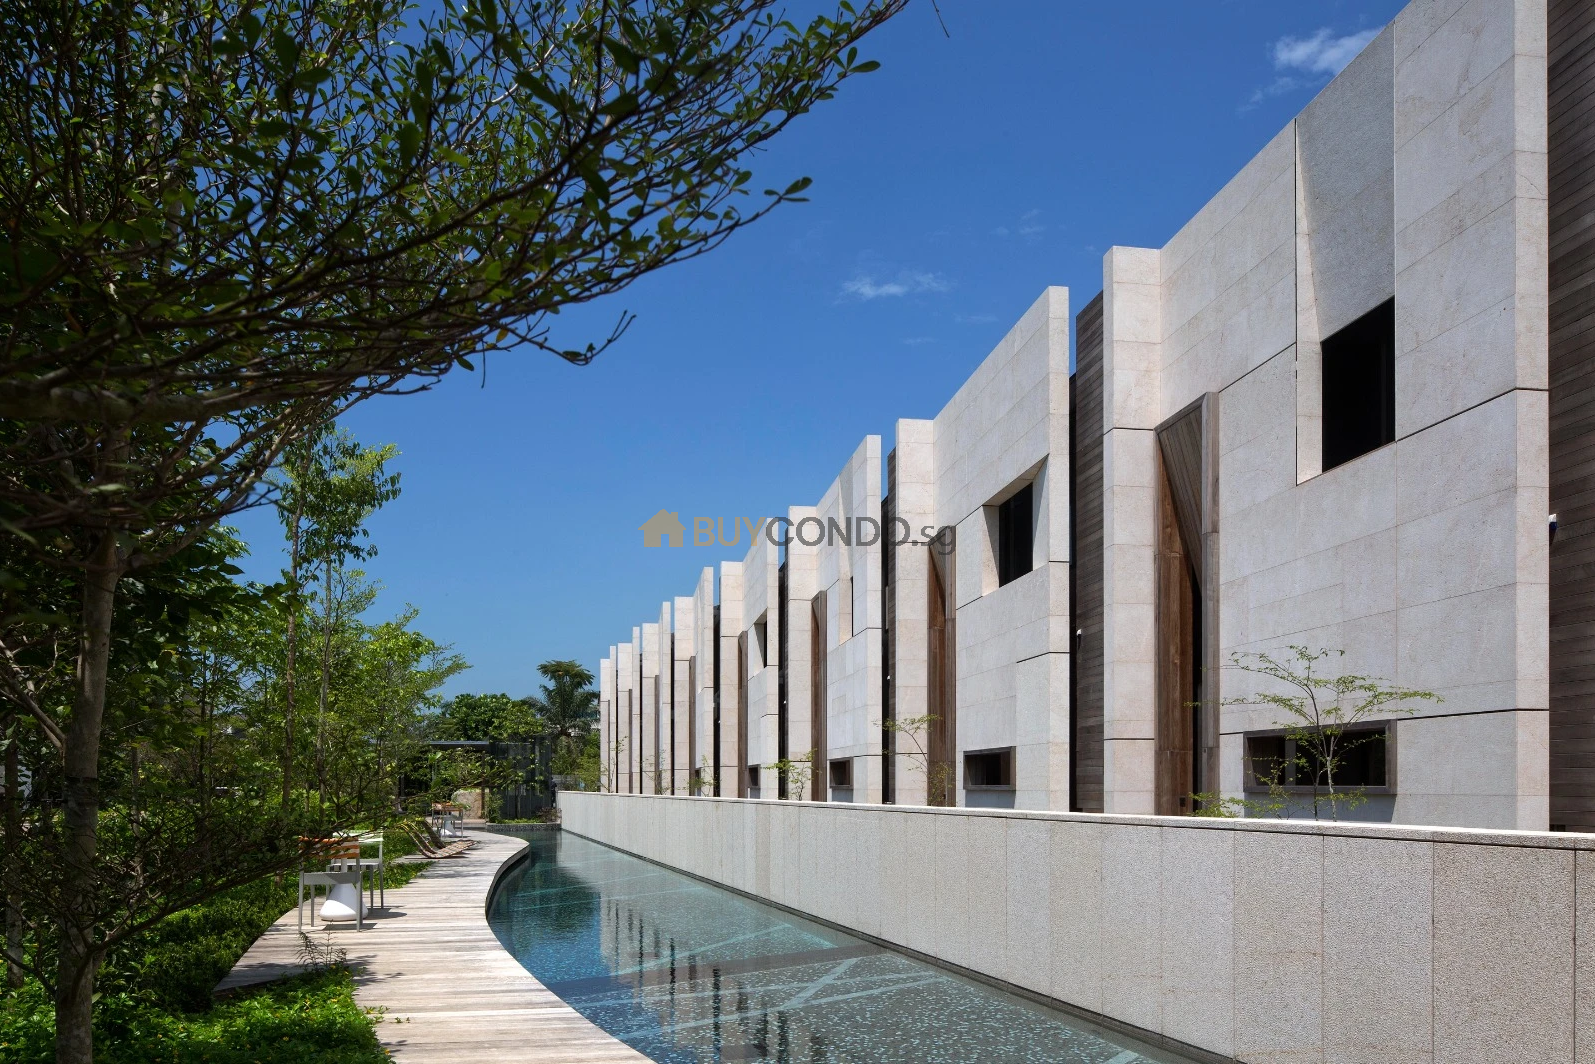 The Green Collection Sentosa offering an elegant way of living